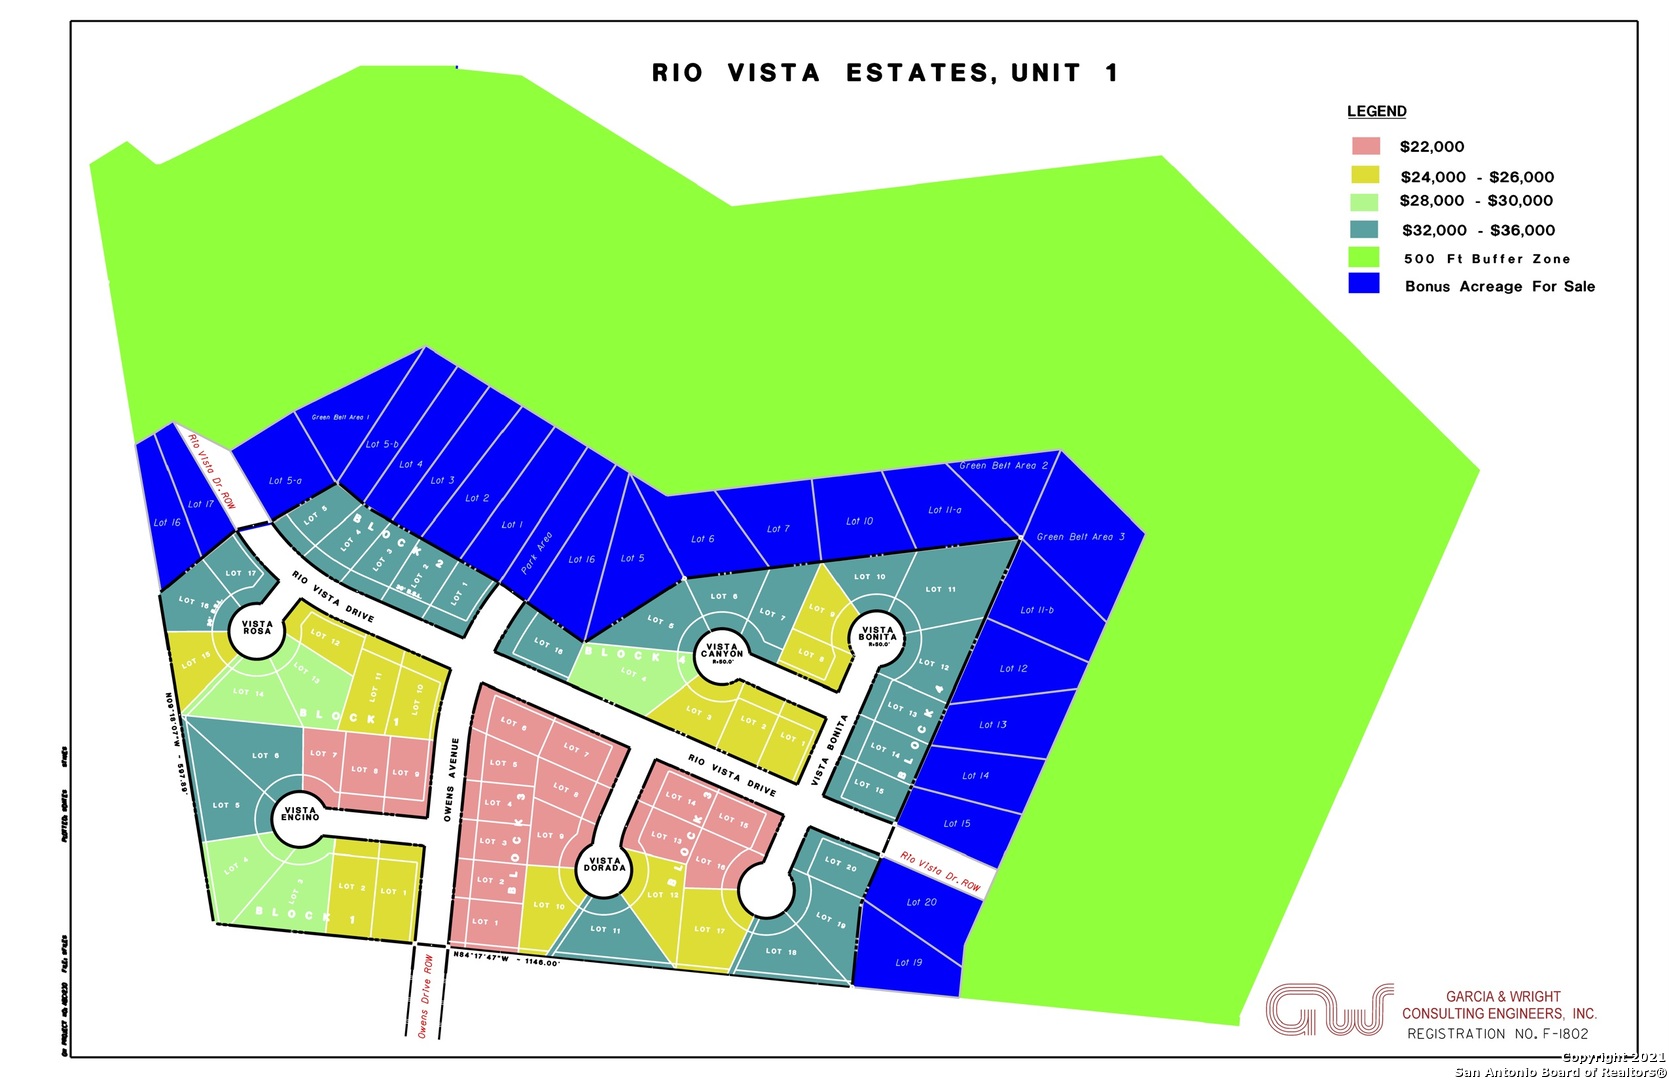 Rio Vista Estates - Finished subdivision with 56 out of 58 lots available.  21.39 ACRES total with an additional 12 acres of Green Belt. City utilities, and paved streets. The subdivision is all in the City limits with it's North and East boundary at the border of the City Limits. This subdivision in small town Three Rivers has a large ranch that borders the North and East boundaries. A twelve (12) acre Green Belt has been established between the subdivision and the ranch; to have a park, nature walking/jogging loop trail.  The lot owners on the North and East side have an option to purchase additional land in the Green Belt to enjoy for recreation and raising chickens/goats etc. In addition, there is a 500 foot restriction from any commercial development to the North or East. Great opportunity for remote workers, retirees, persons wanting lower property tax and people who enjoy boating and fishing at Choke Canyon Lake which is only 12 minutes away.  All 56 lots are available for purchase in addition to purchase of one or multiple lots, contact Listing Realtor for individual lot pricing. See the type of house in one of the photos that adheres to building restrictions. Contact listing realtor for copy of subdivision restrictions.